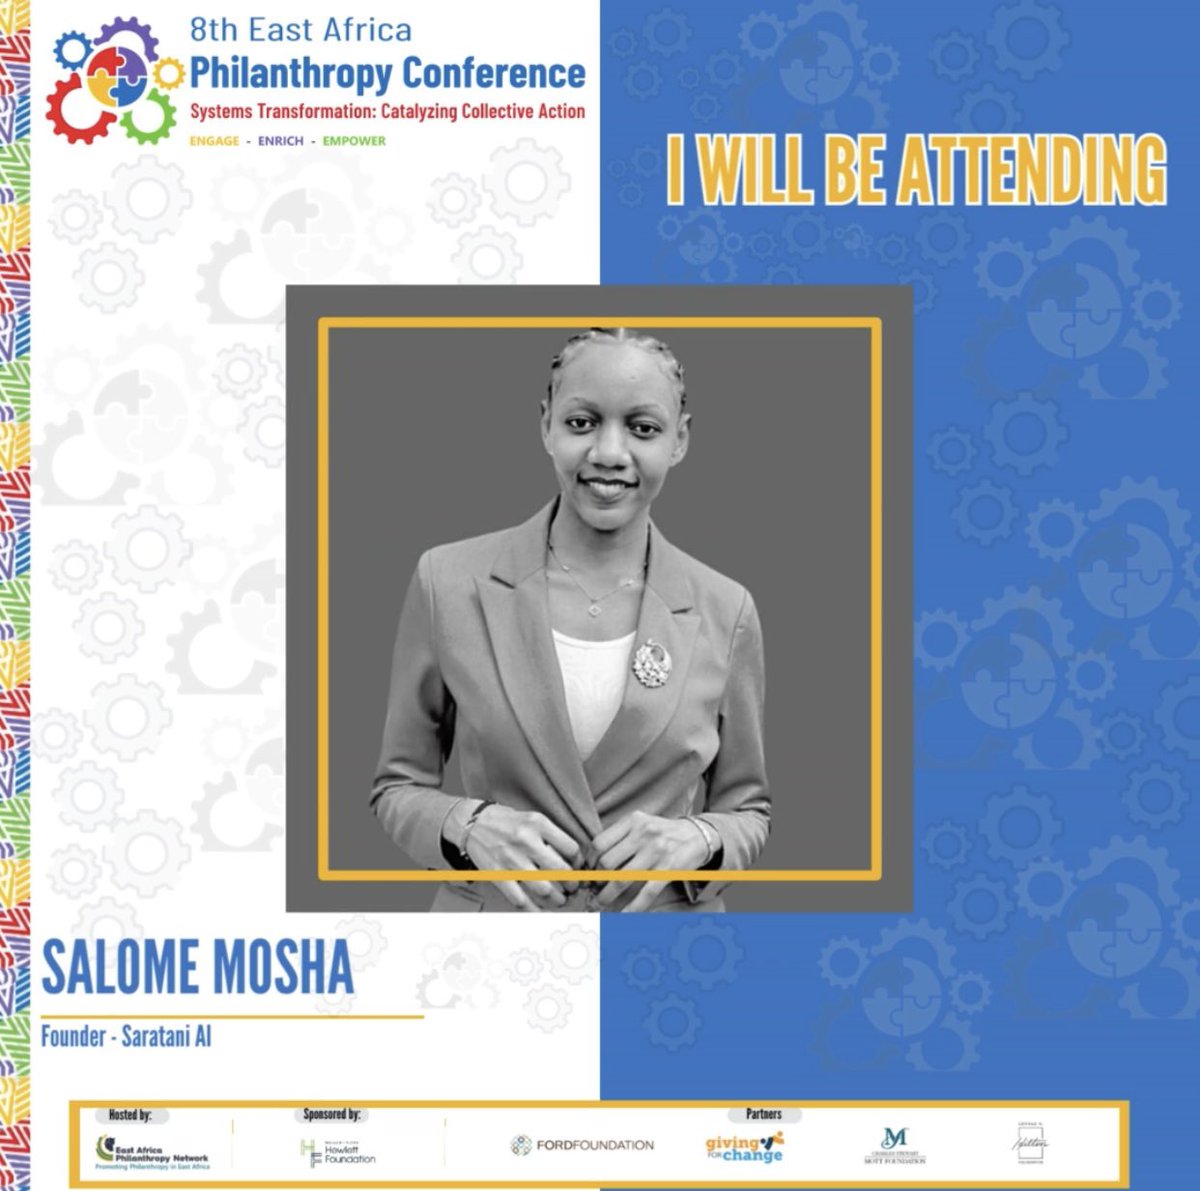 Join forces at the Philanthropy Conference , come to Connect with influential network of professionals, philanthropists, and industry experts who are passionate about making a difference. Build meaningful relationships and explore potential collaborations
@EAPhilanthropy #8thEAPC